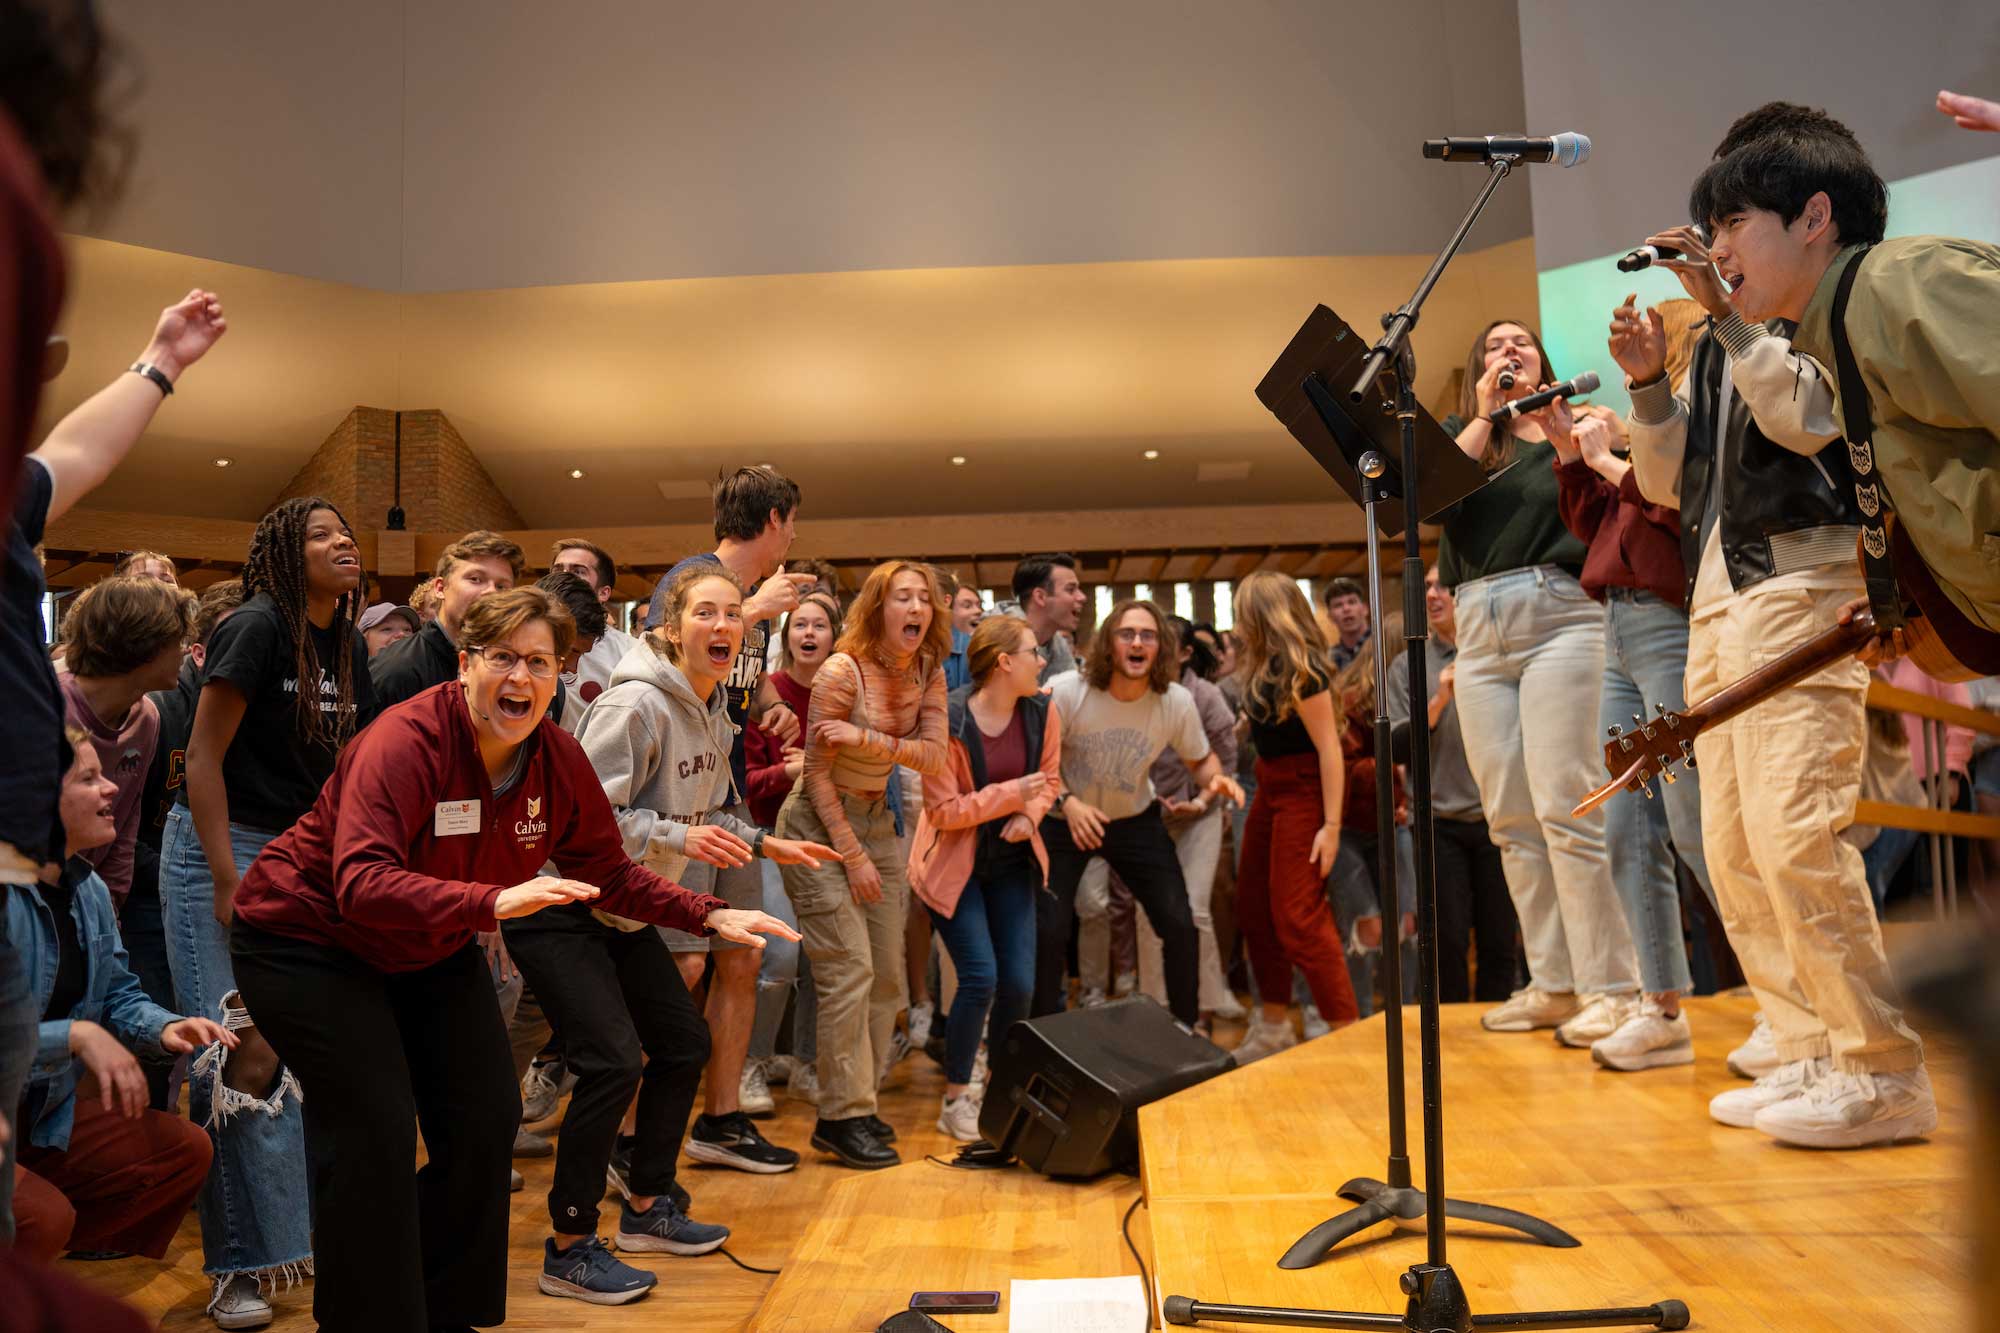 The Calvin student worship team leads at the front of chapel, while students and staff sing and cheer energetically.